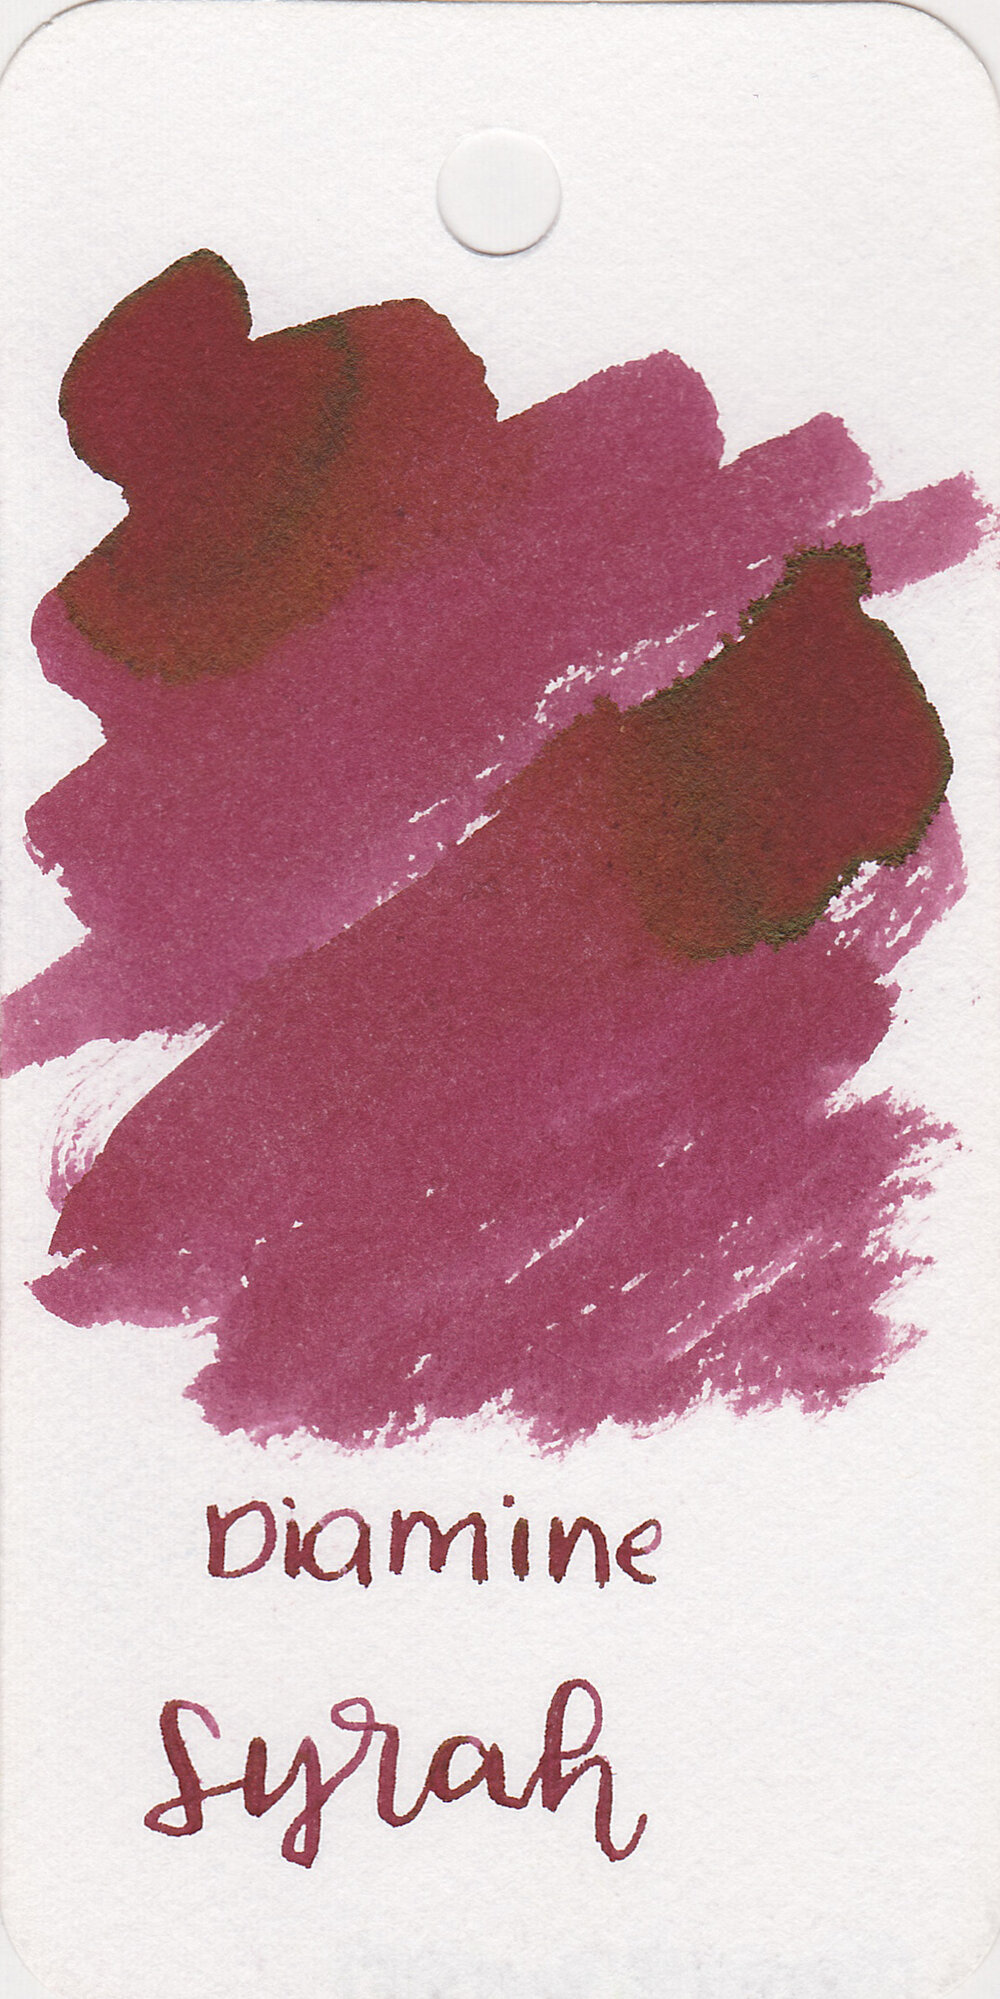 Ink Review #1238: Diamine Syrah — Mountain of Ink